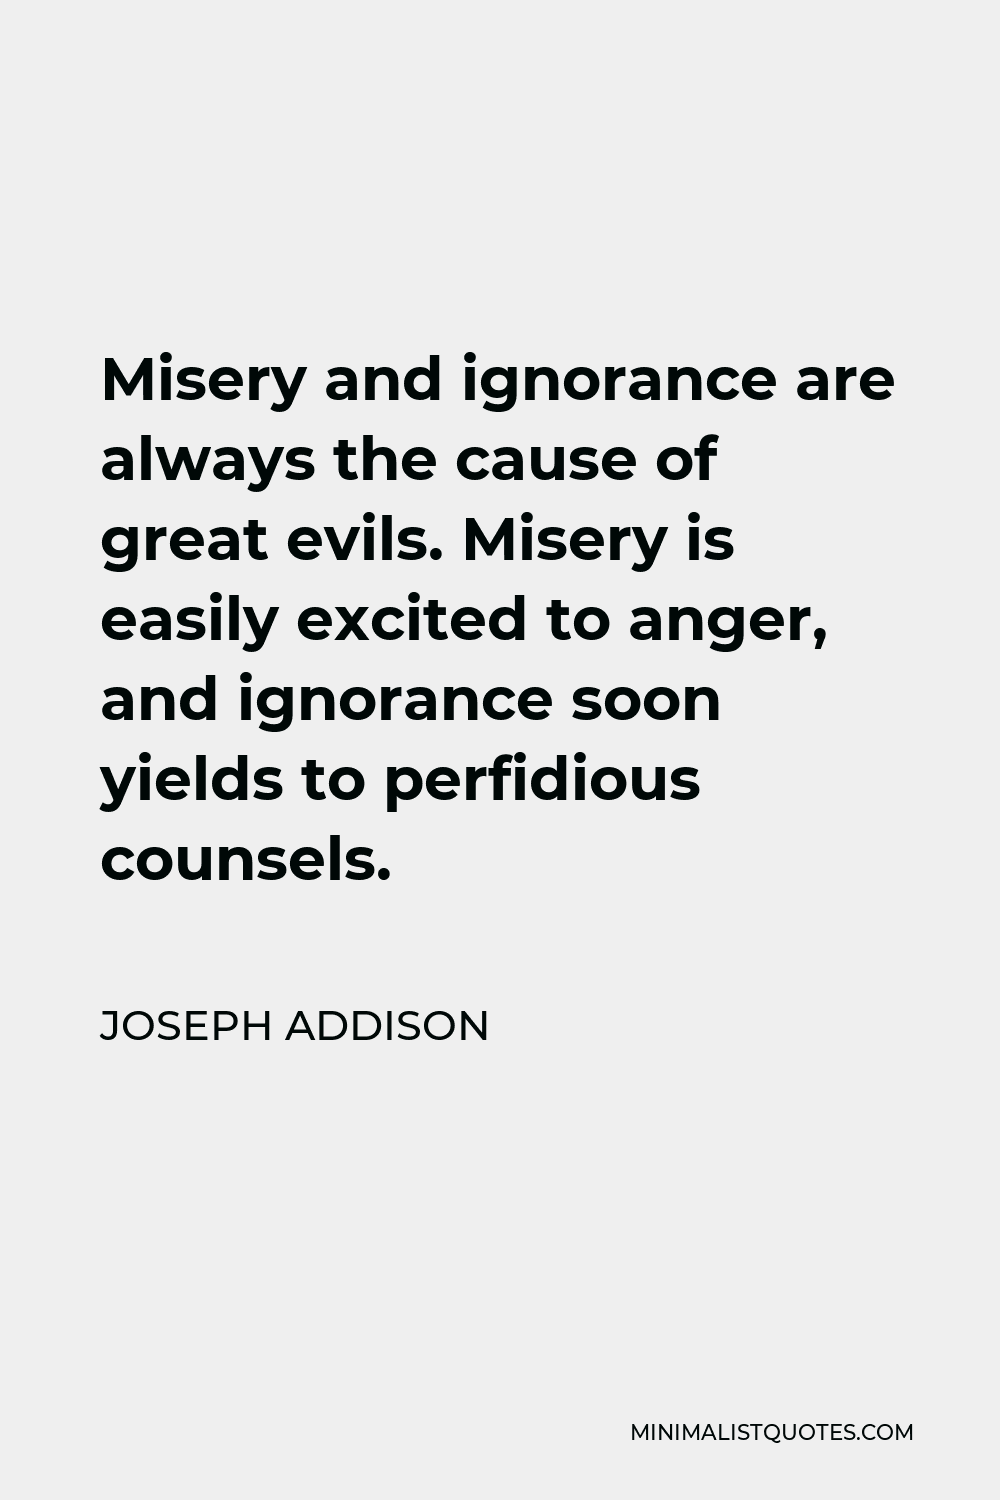 Joseph Addison Quote - Misery and ignorance are always the cause of great evils. Misery is easily excited to anger, and ignorance soon yields to perfidious counsels.